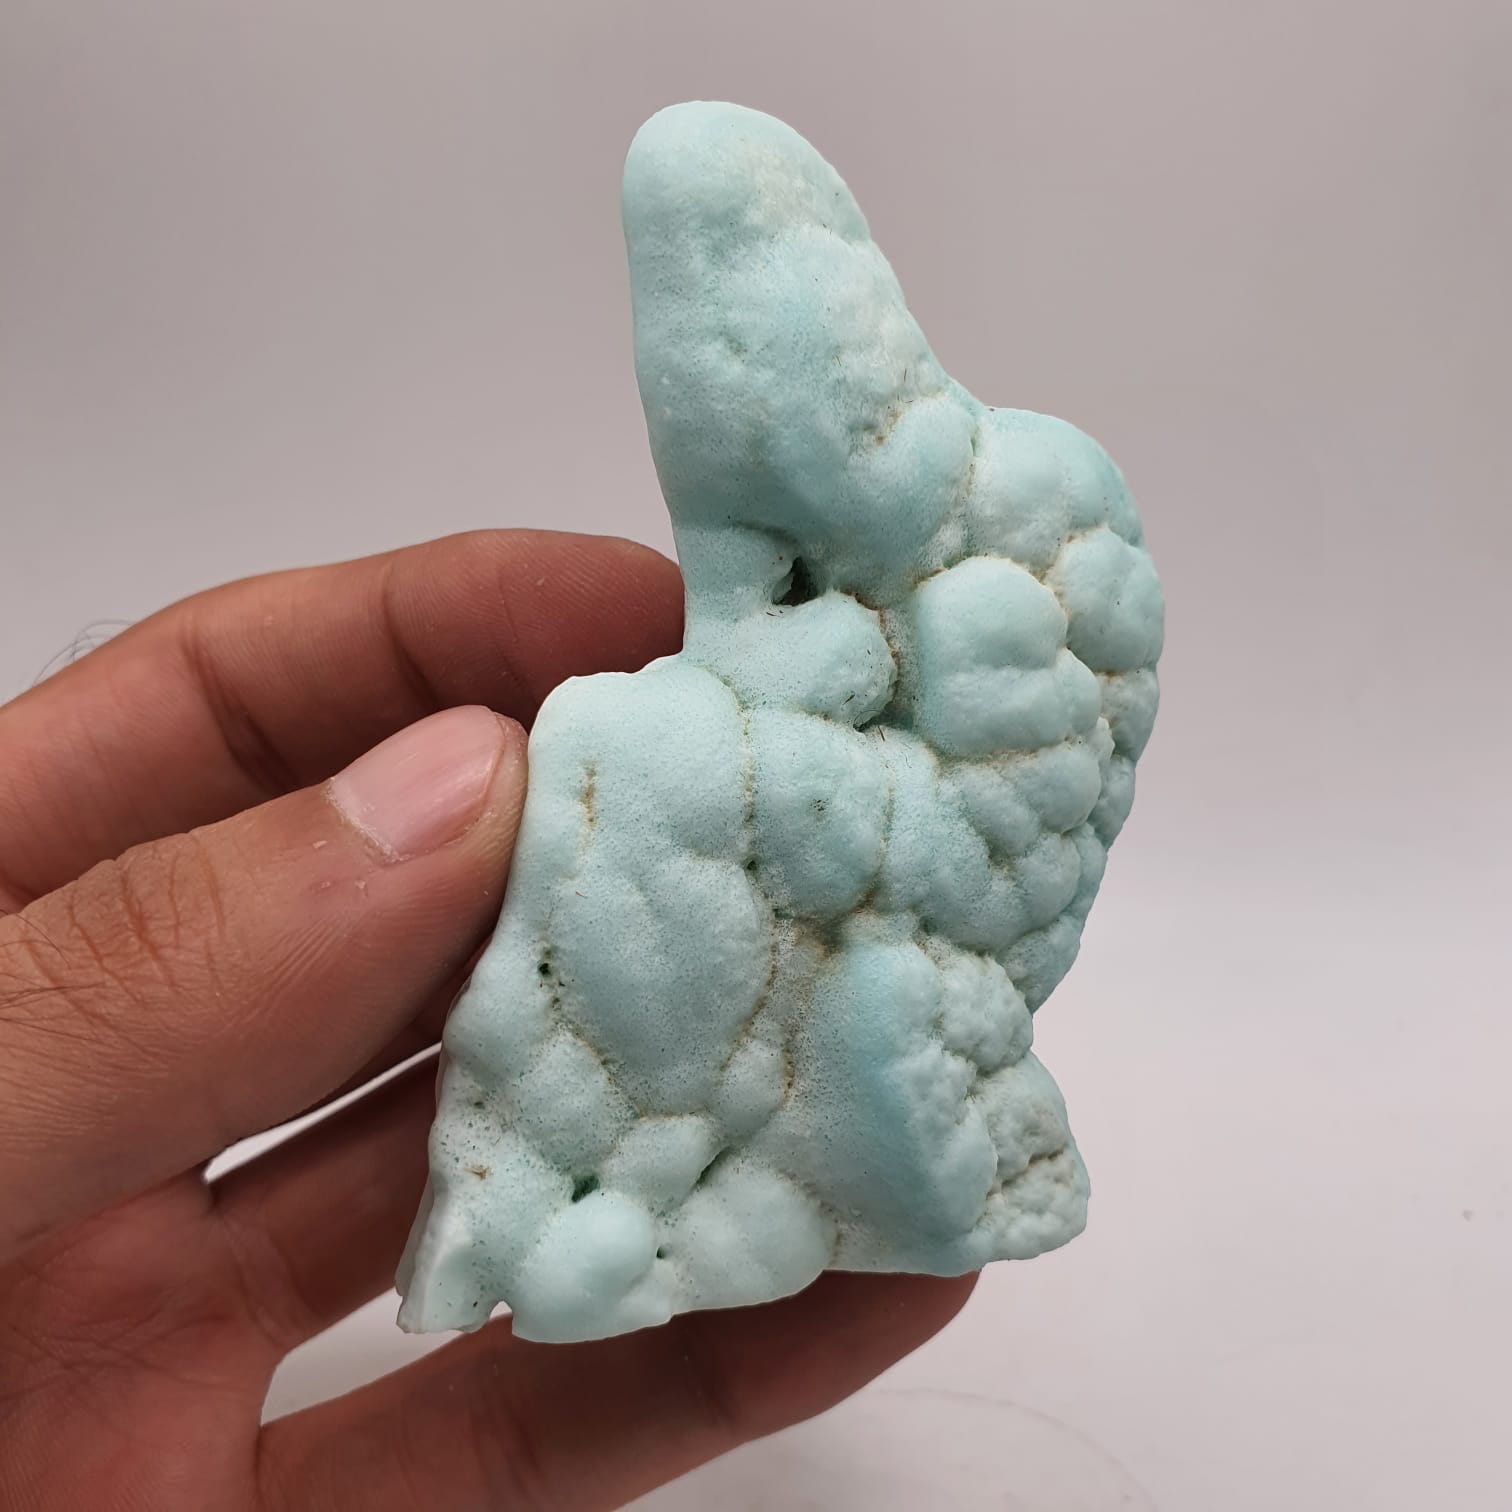 Attractive And Interesting Crystallography For Blue Aragonite